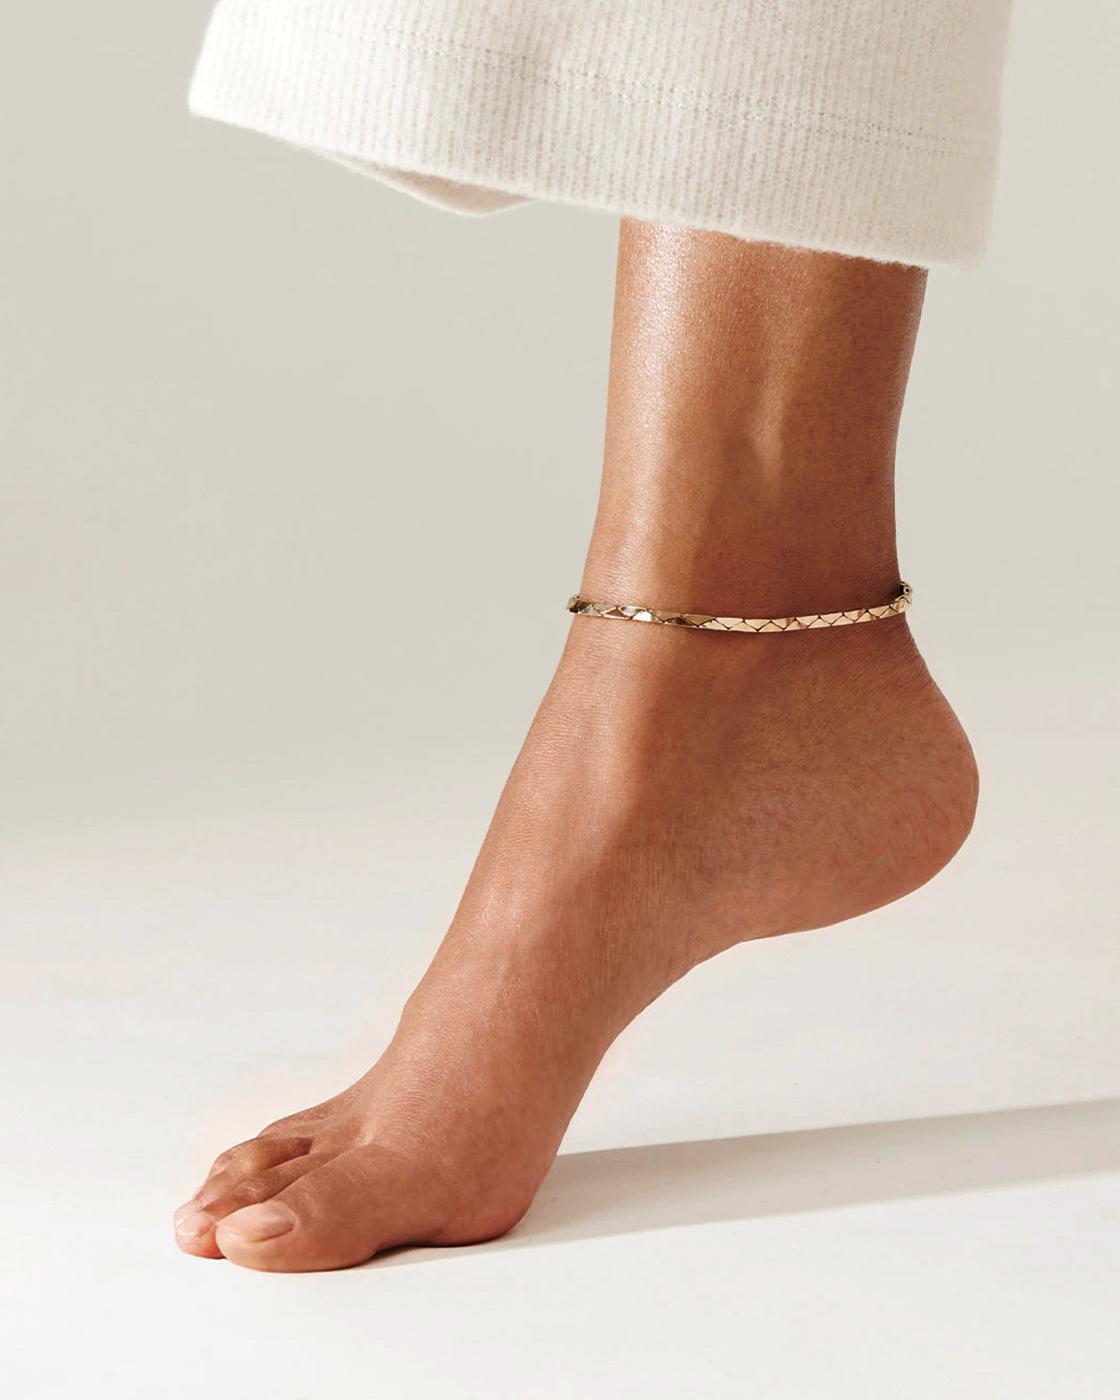 Rae Gold Tone-Dipped Brass Anklet